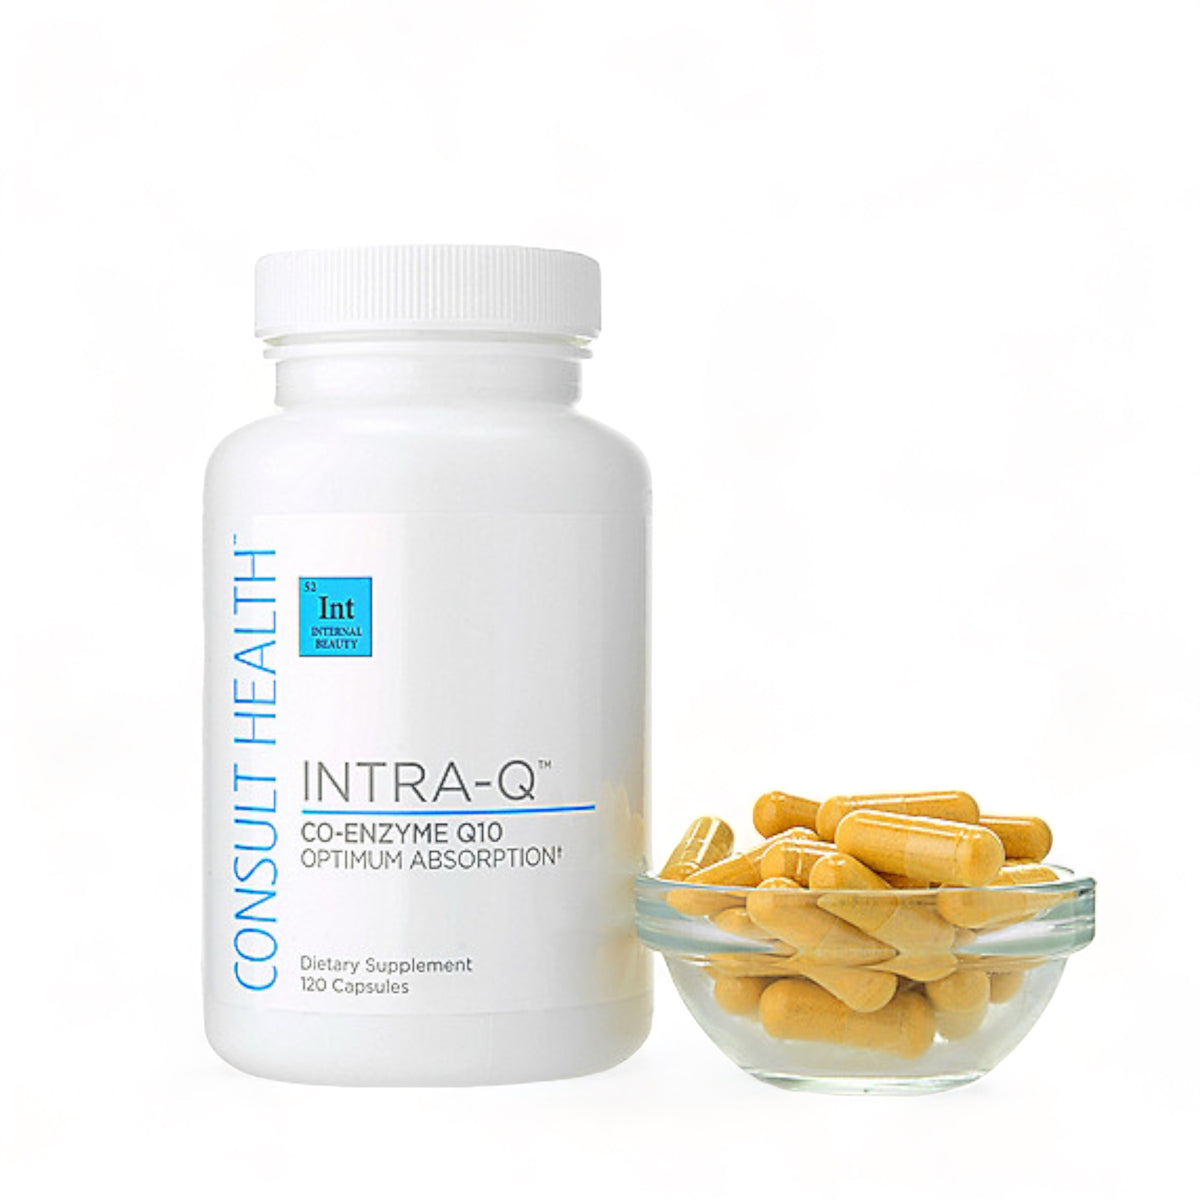 Intra-Q Co-Enzyme Q10 Dietary Supplement